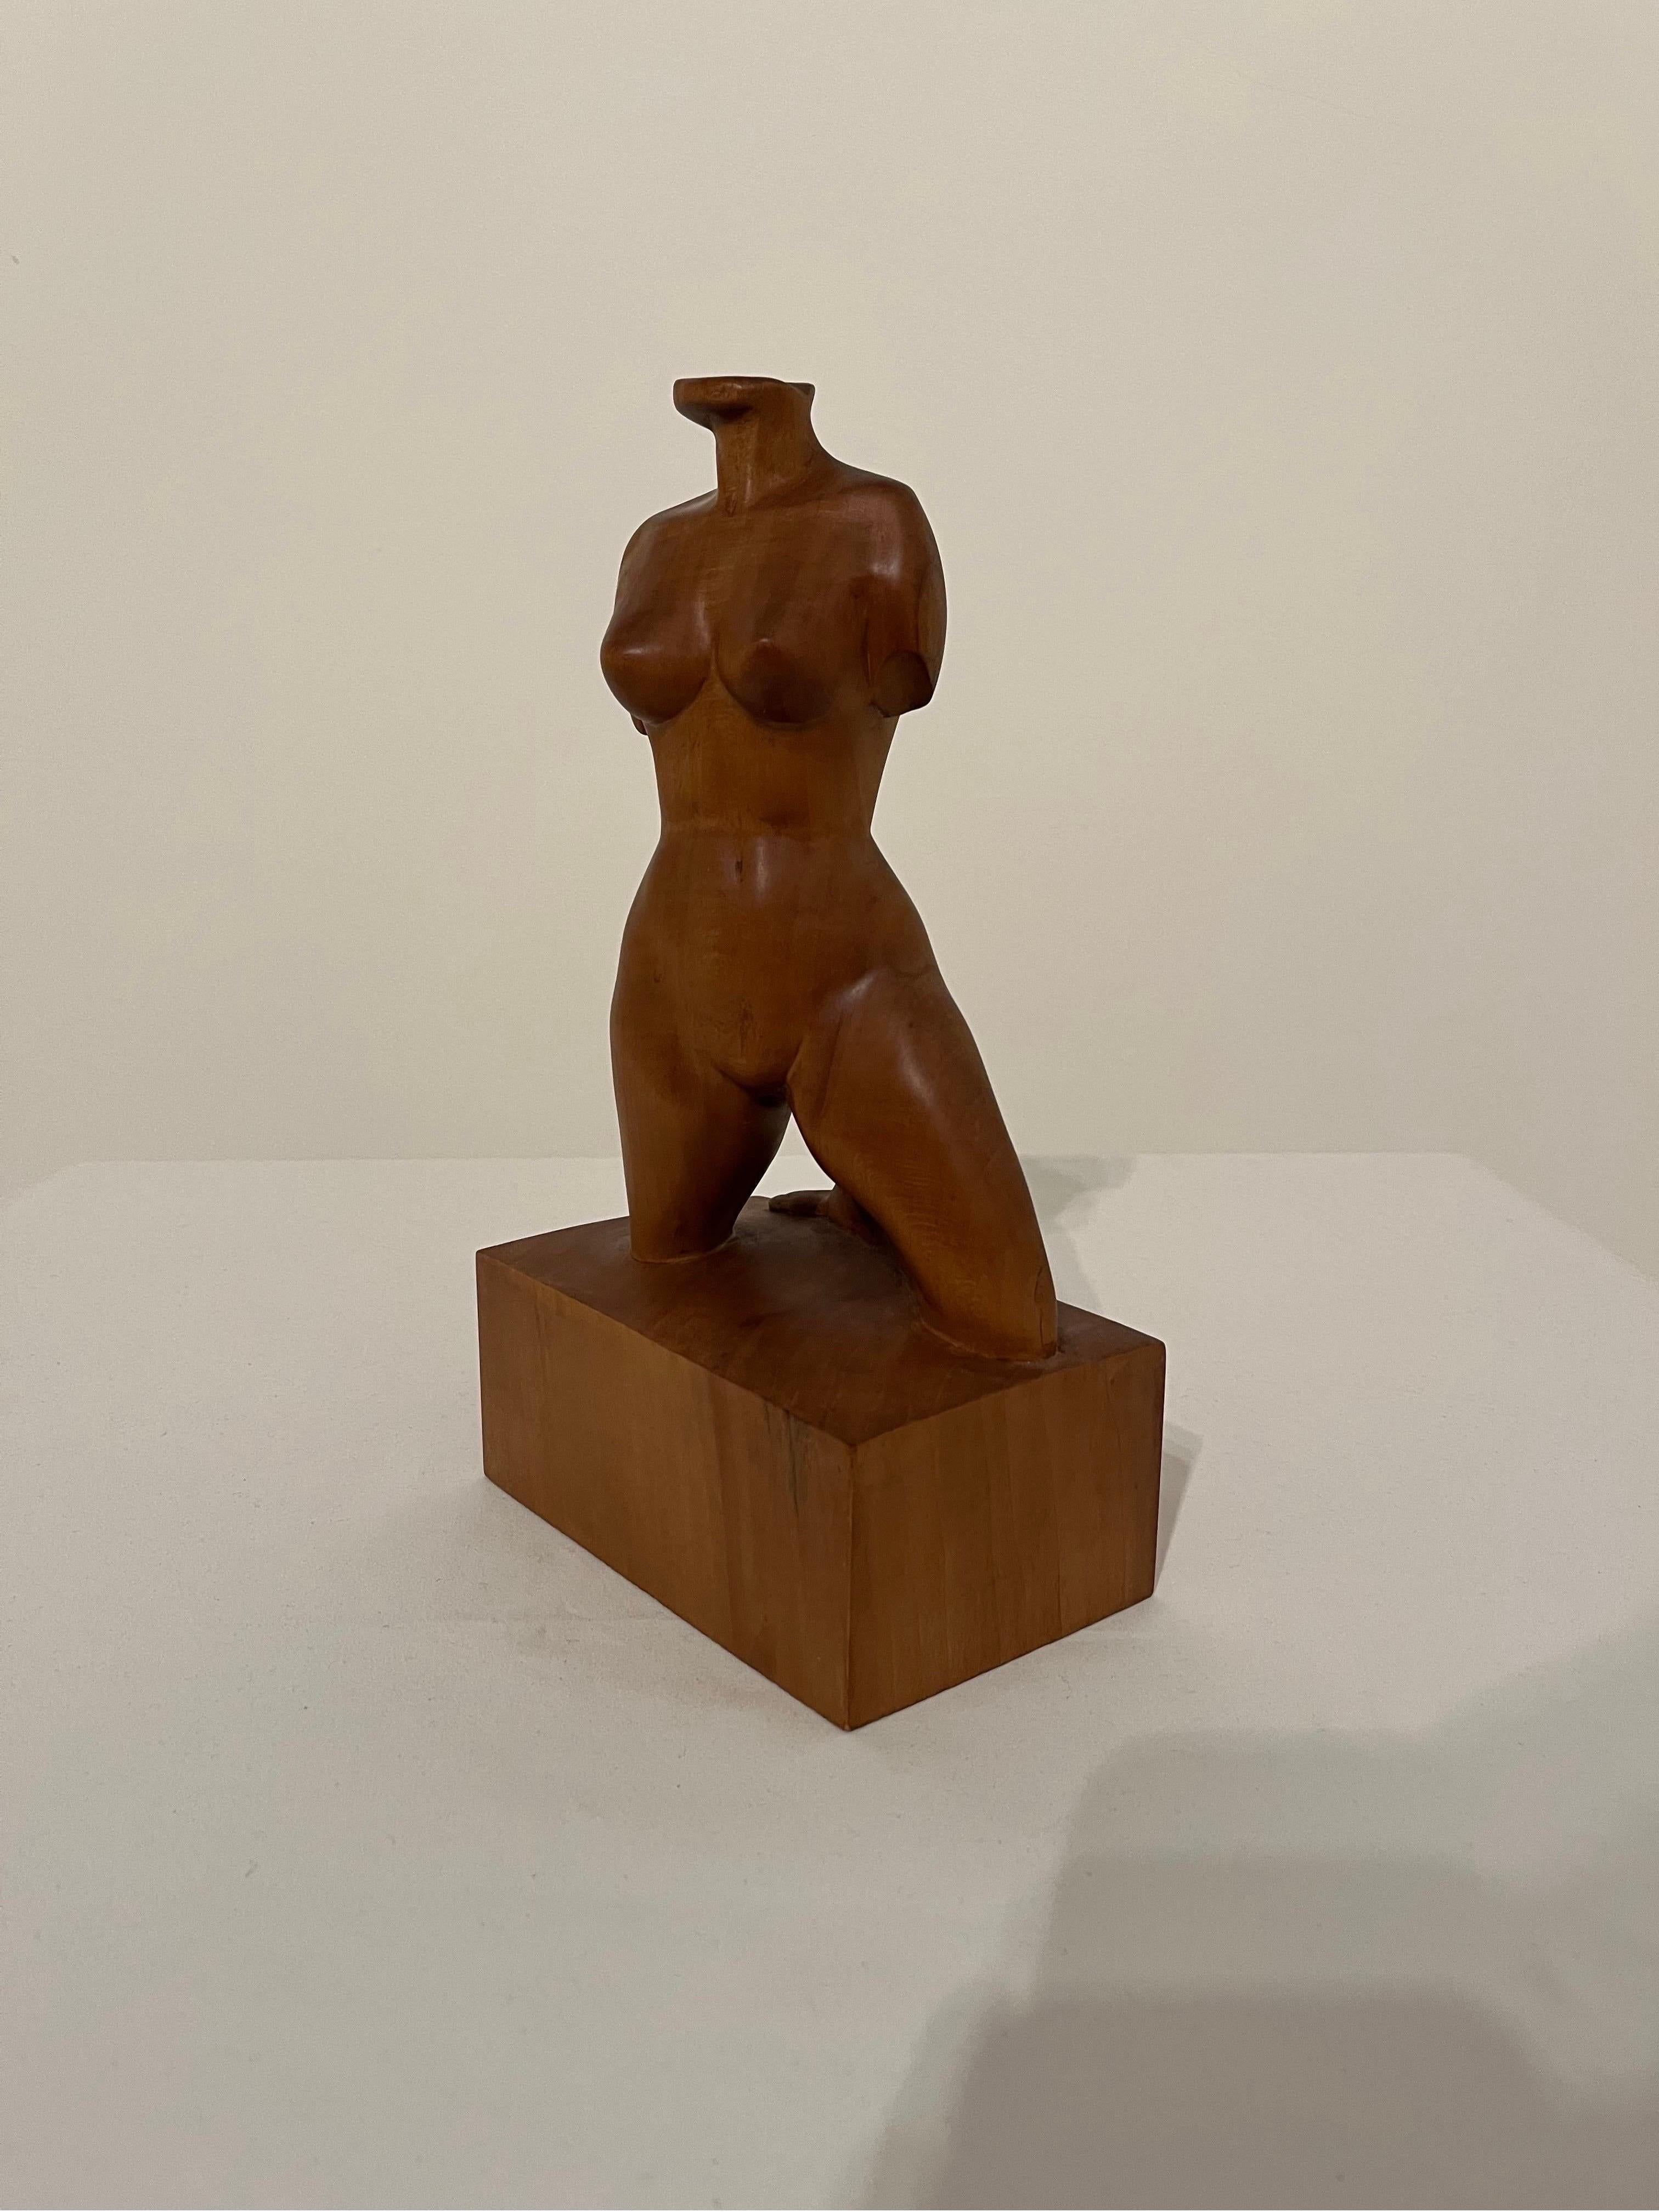 Mid-20th Century Female Nude Figure Bust Wood Carving 1960s sculpture  For Sale